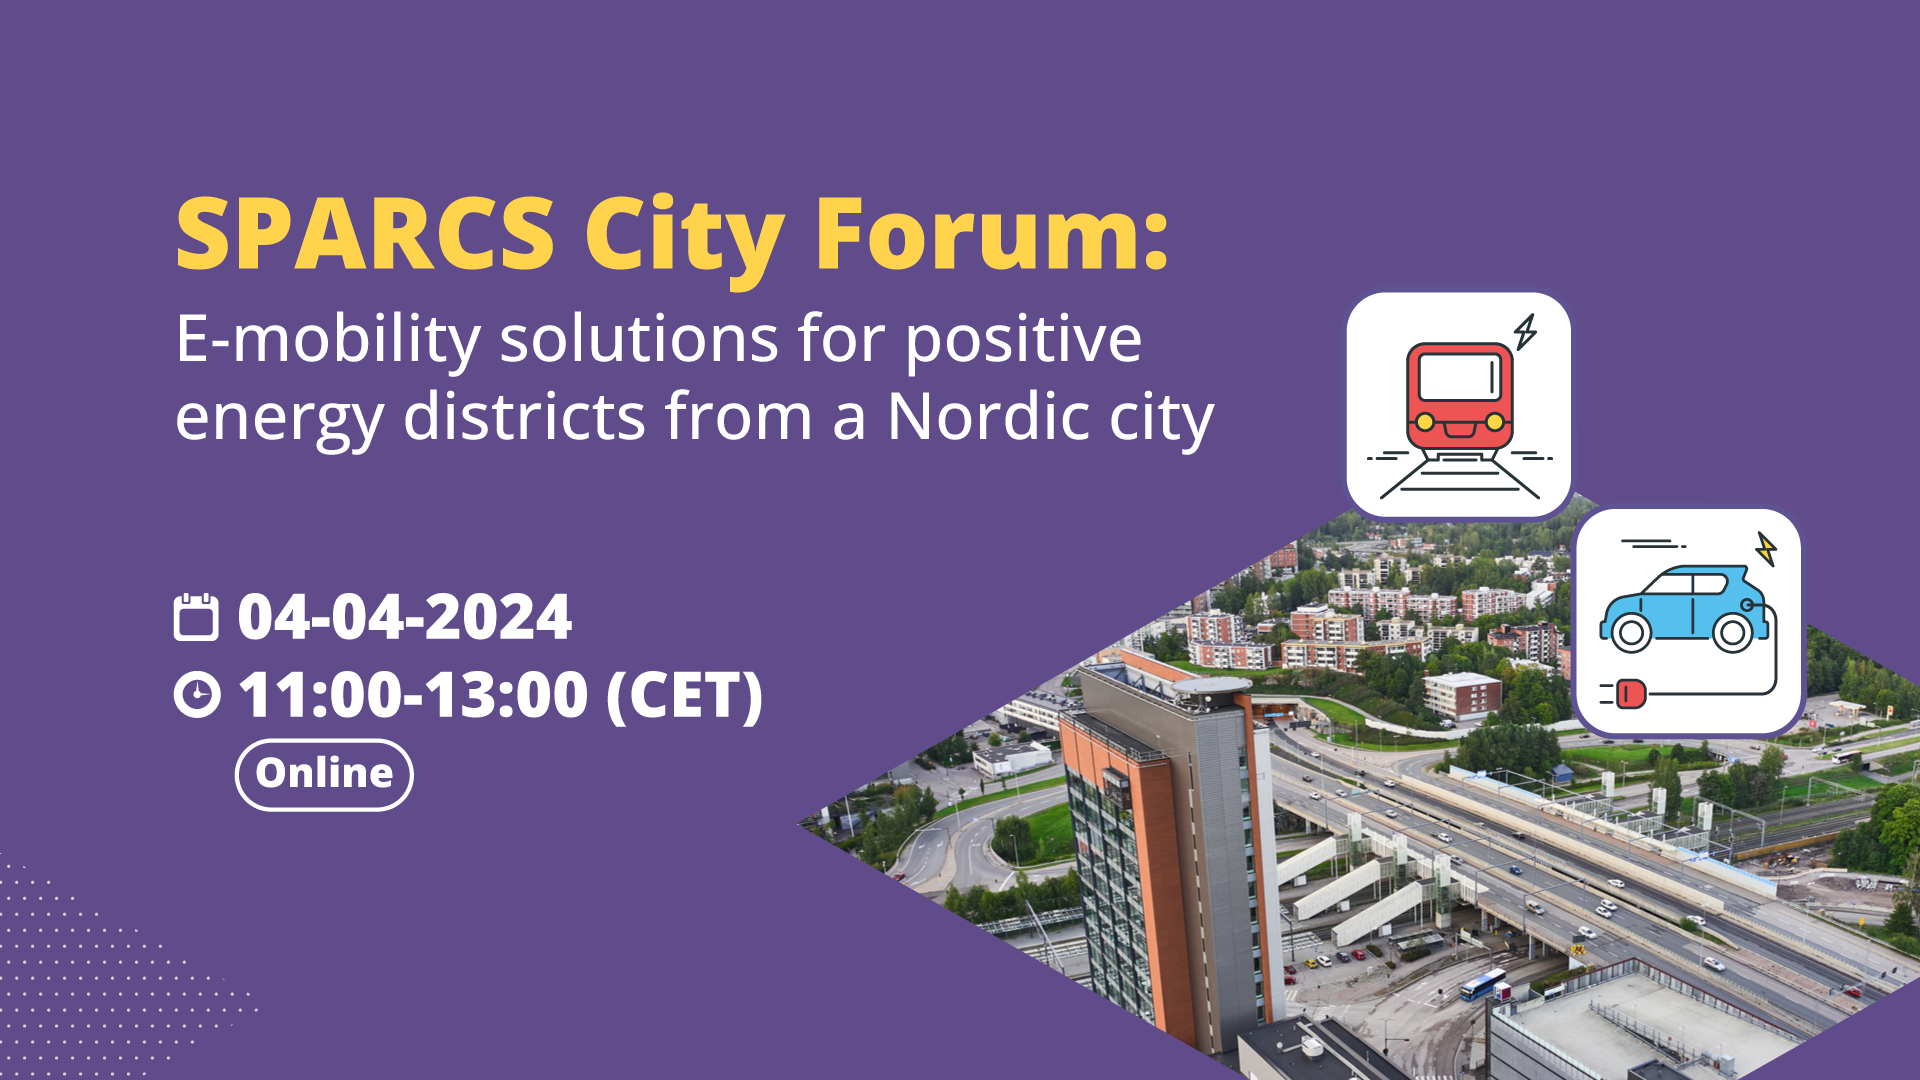 SPARCS City Forum: E-mobility Solutions for Positive Energy Districts in Nordic Cities